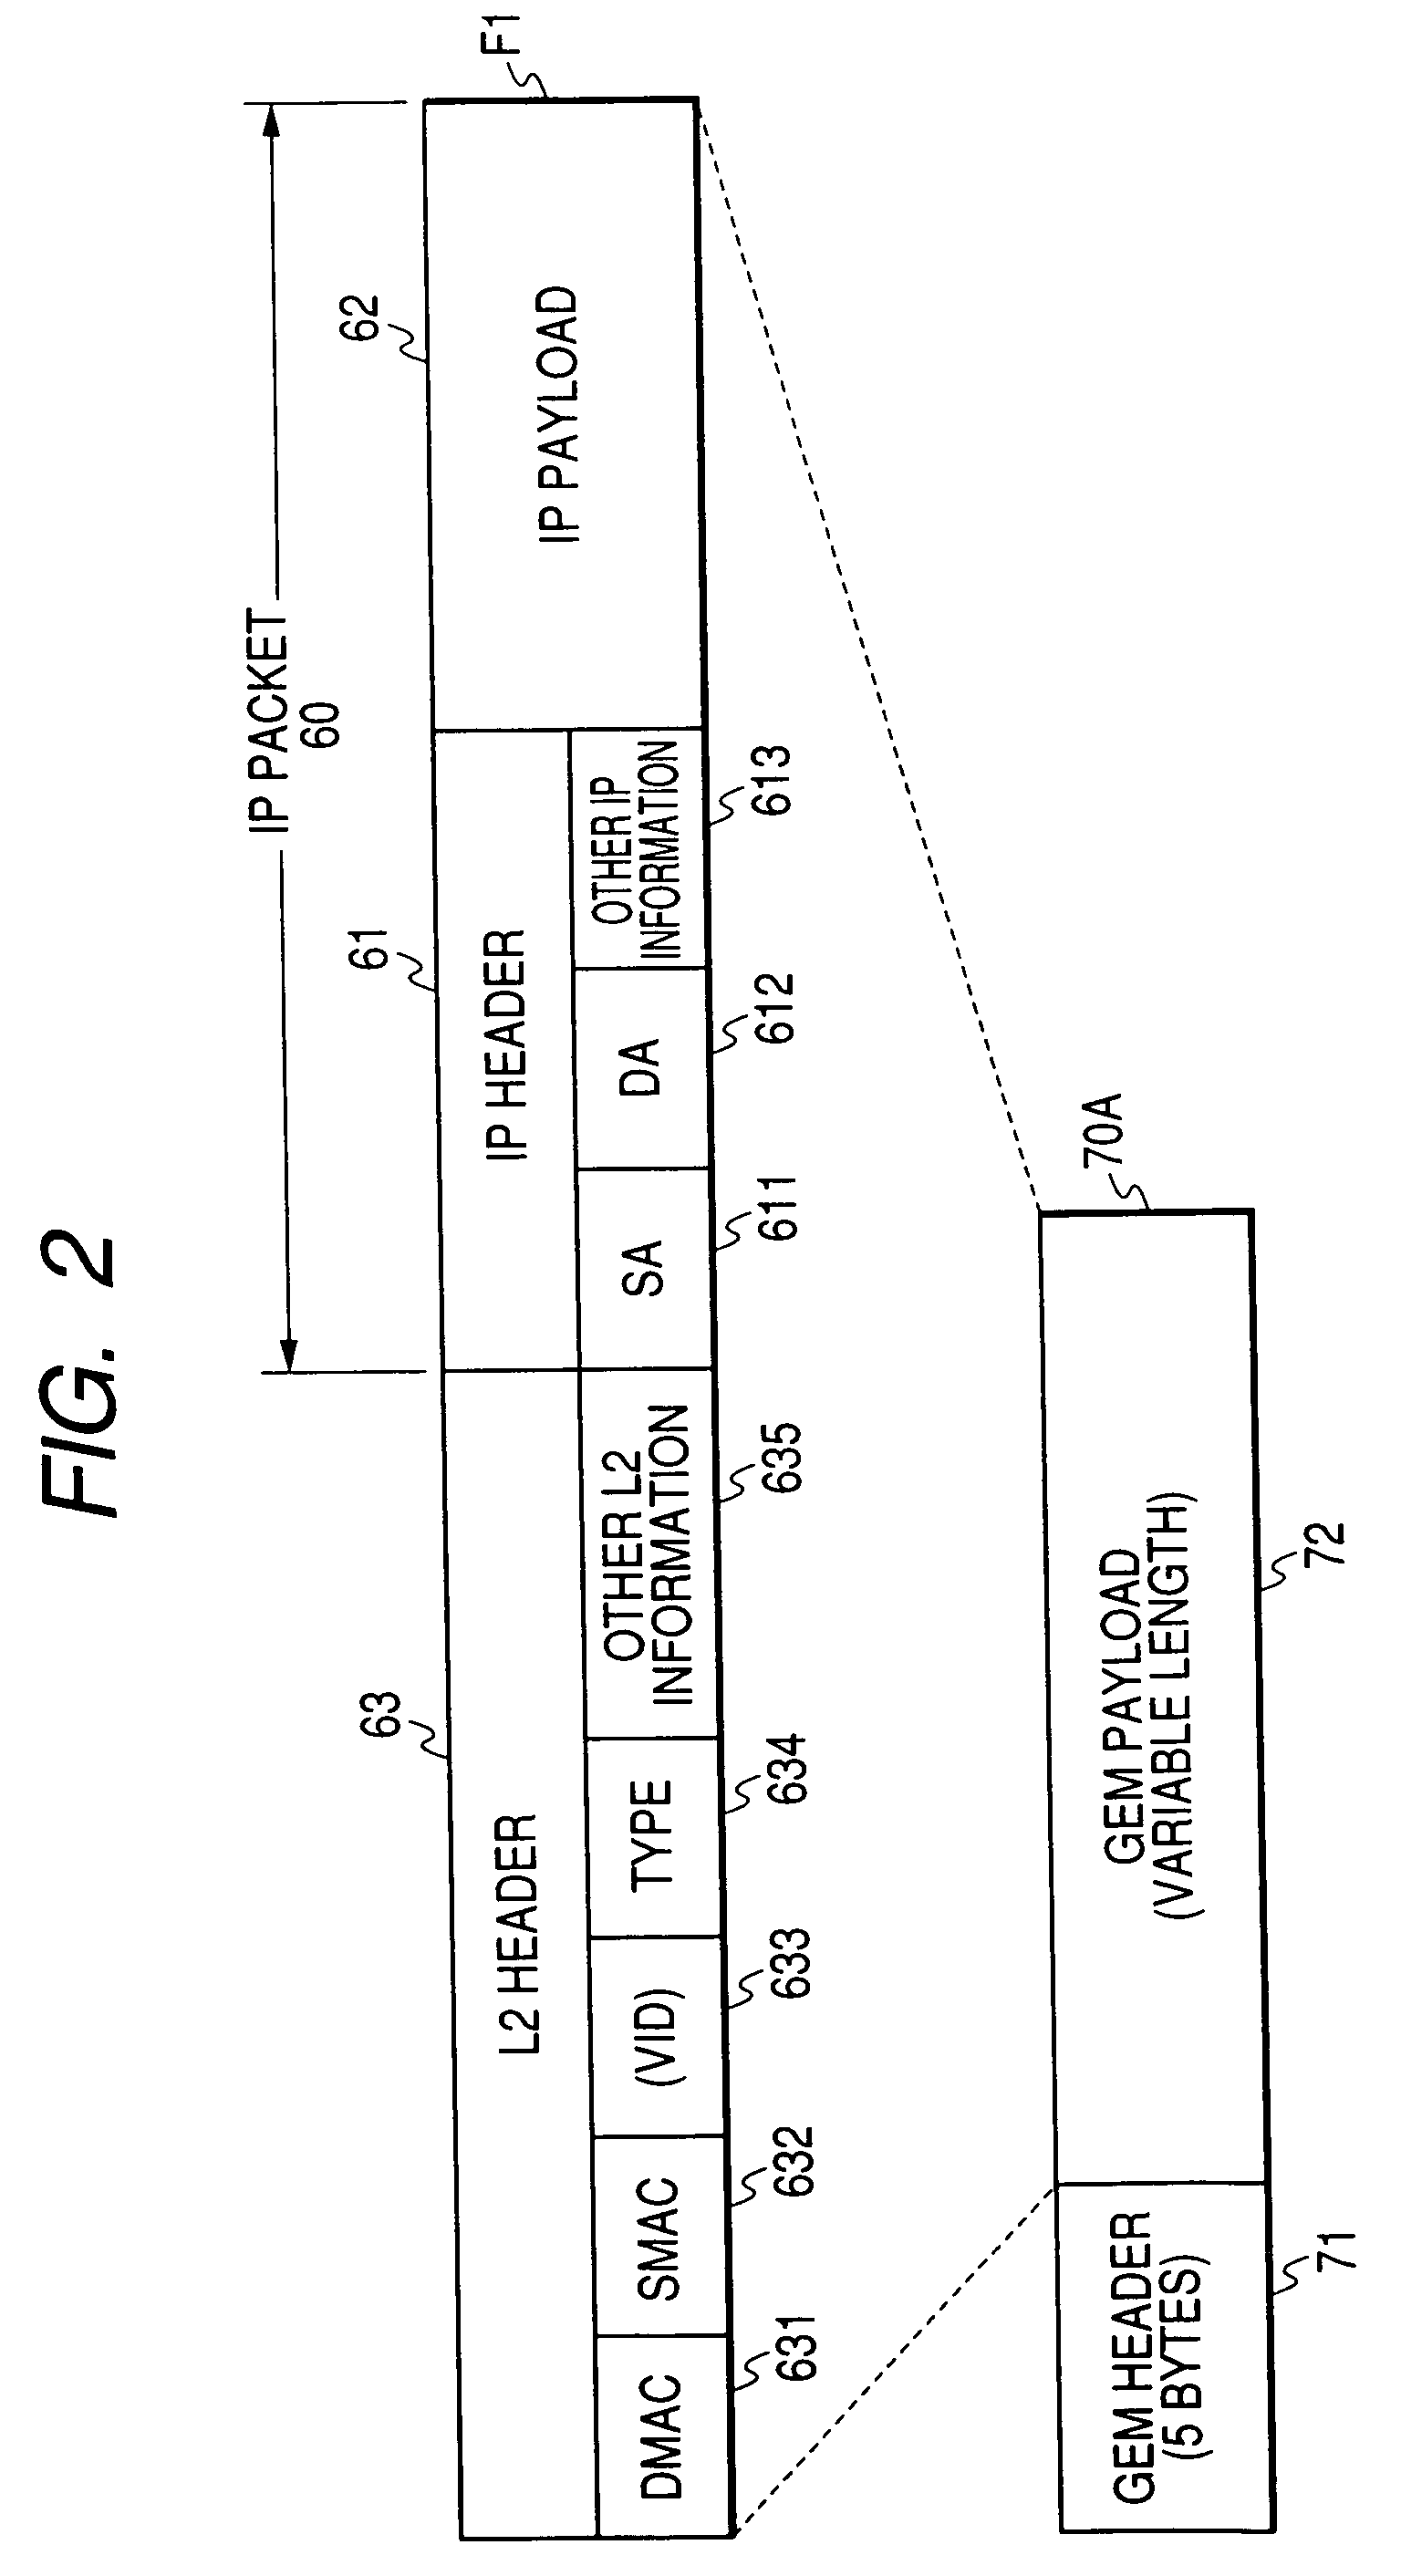 Passive optical network (PON) system